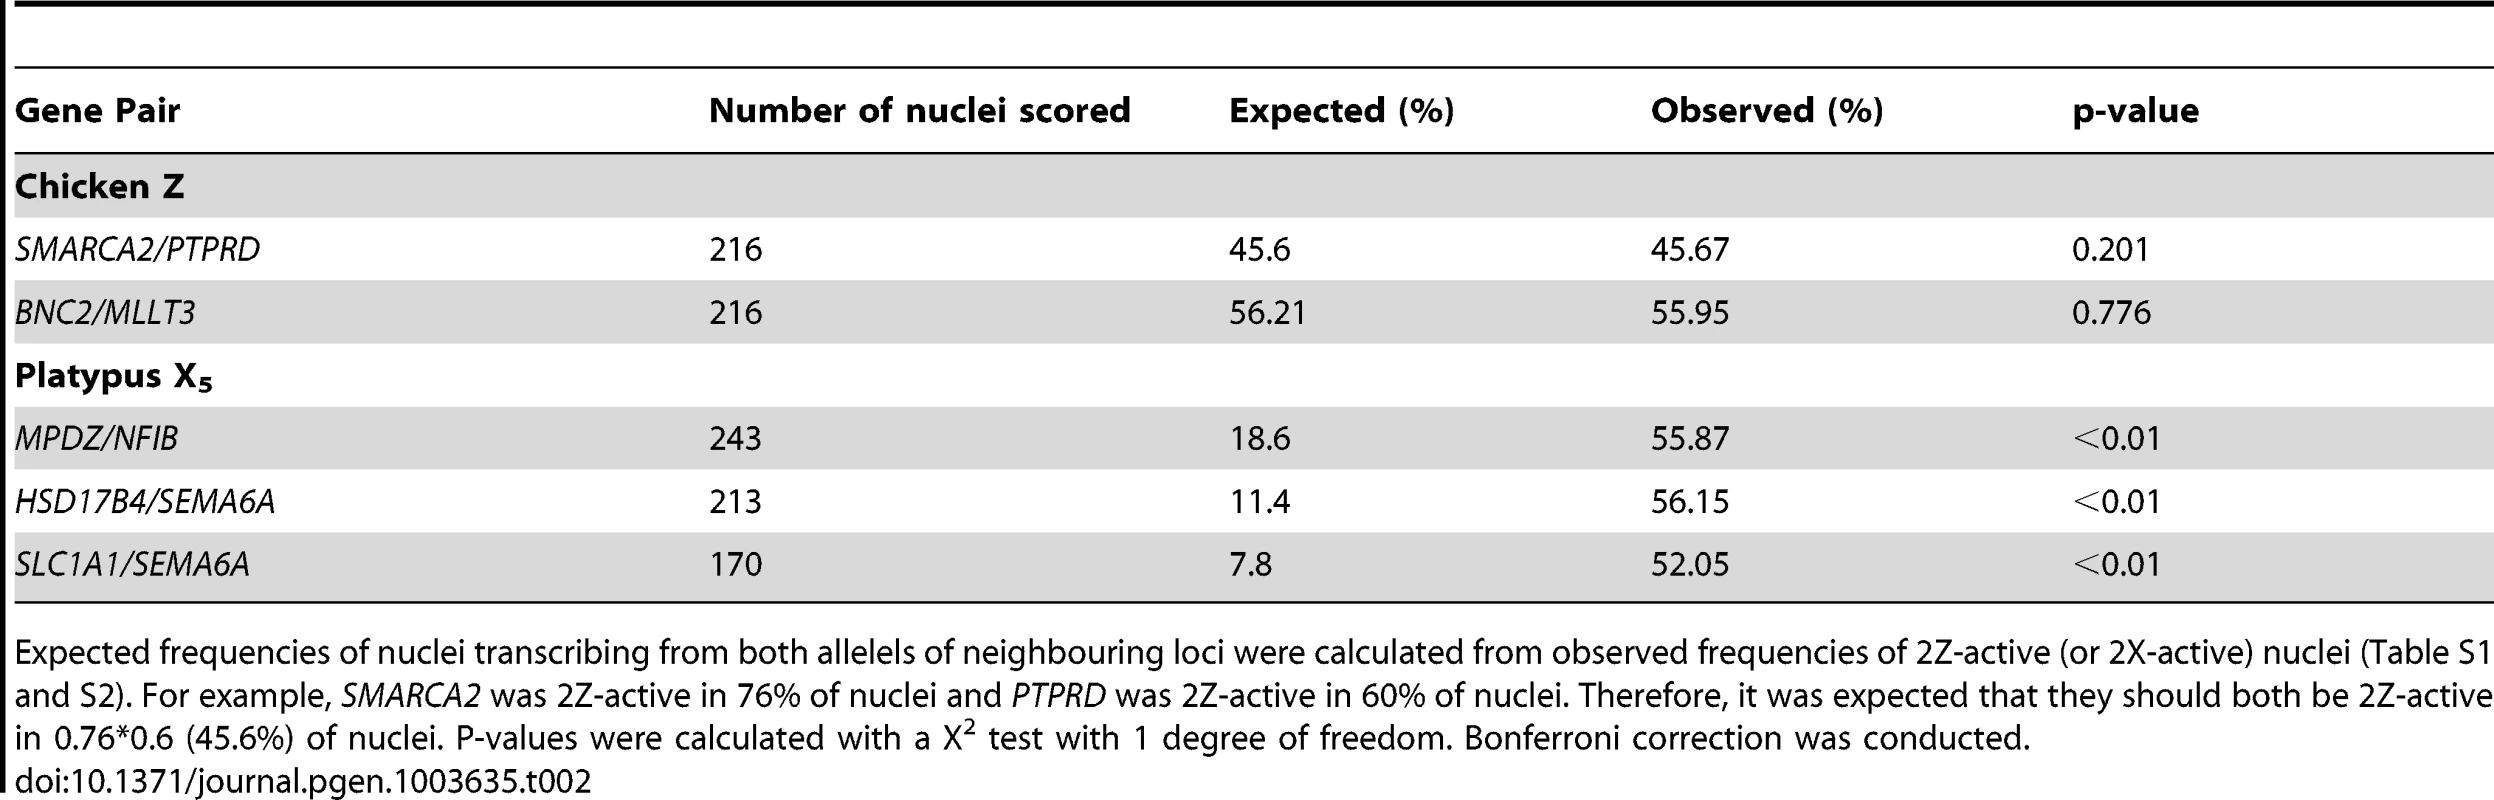 Frequency of nuclei transcribing both alleles of neighbouring loci.